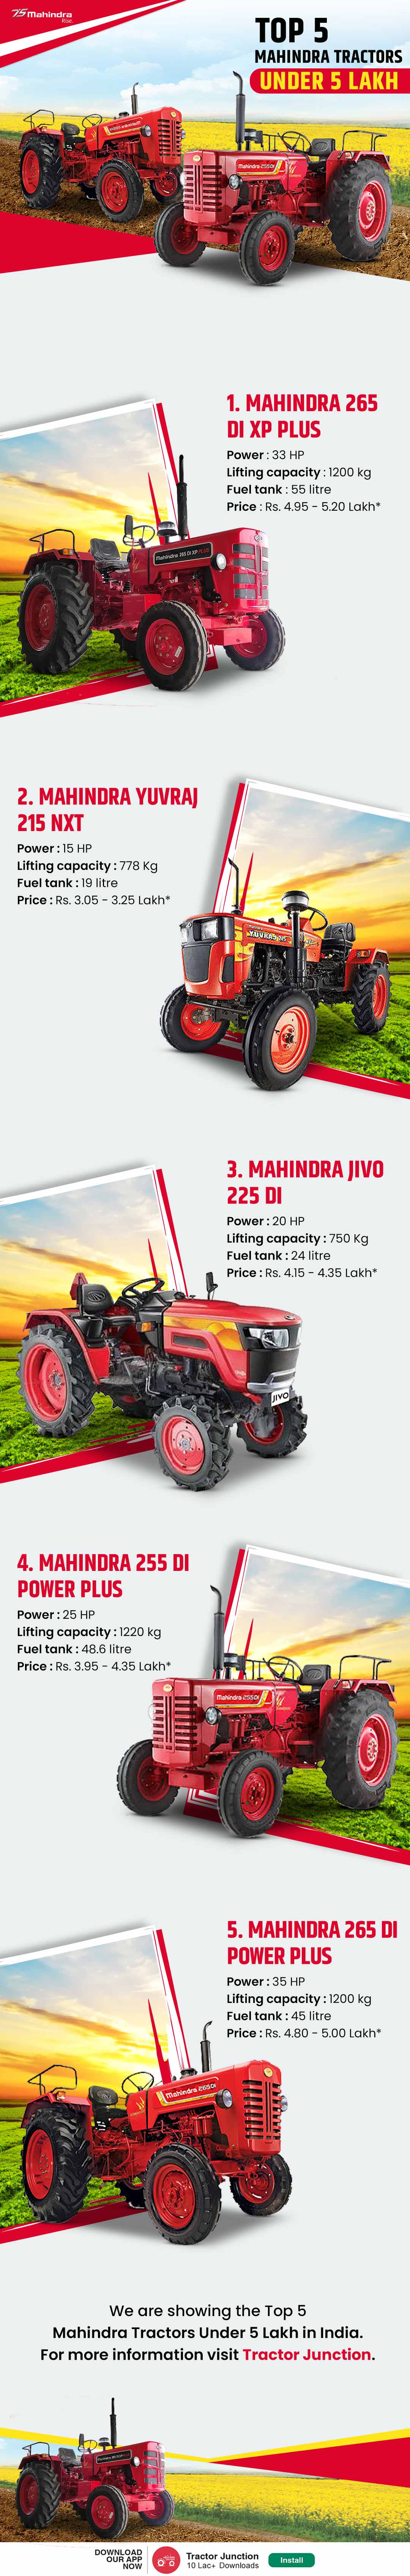 Top 5 Mahindra Tractors Under 5 Lakh infographic 